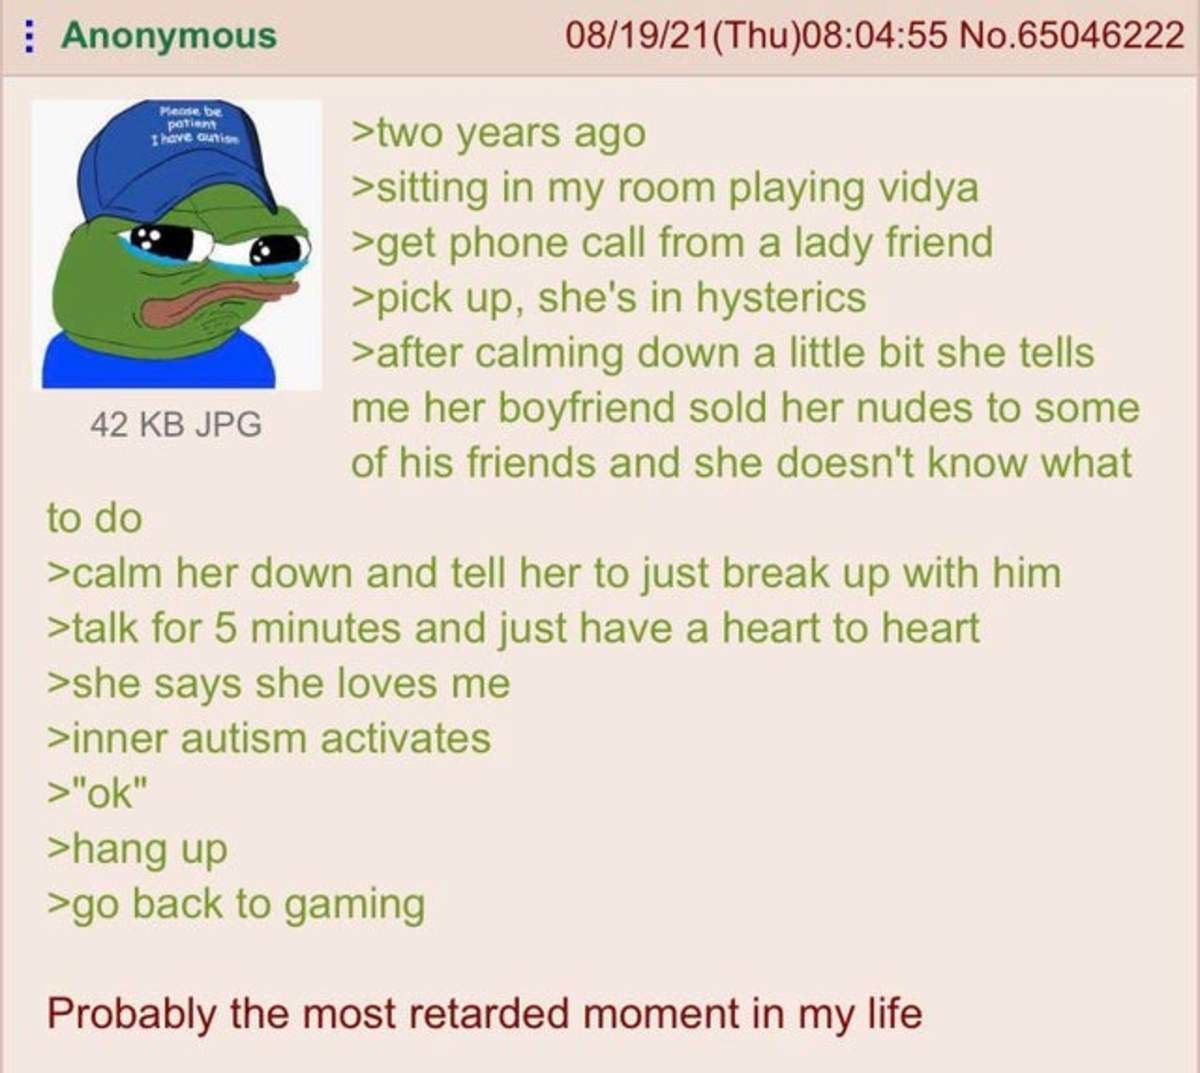 anon is a chad